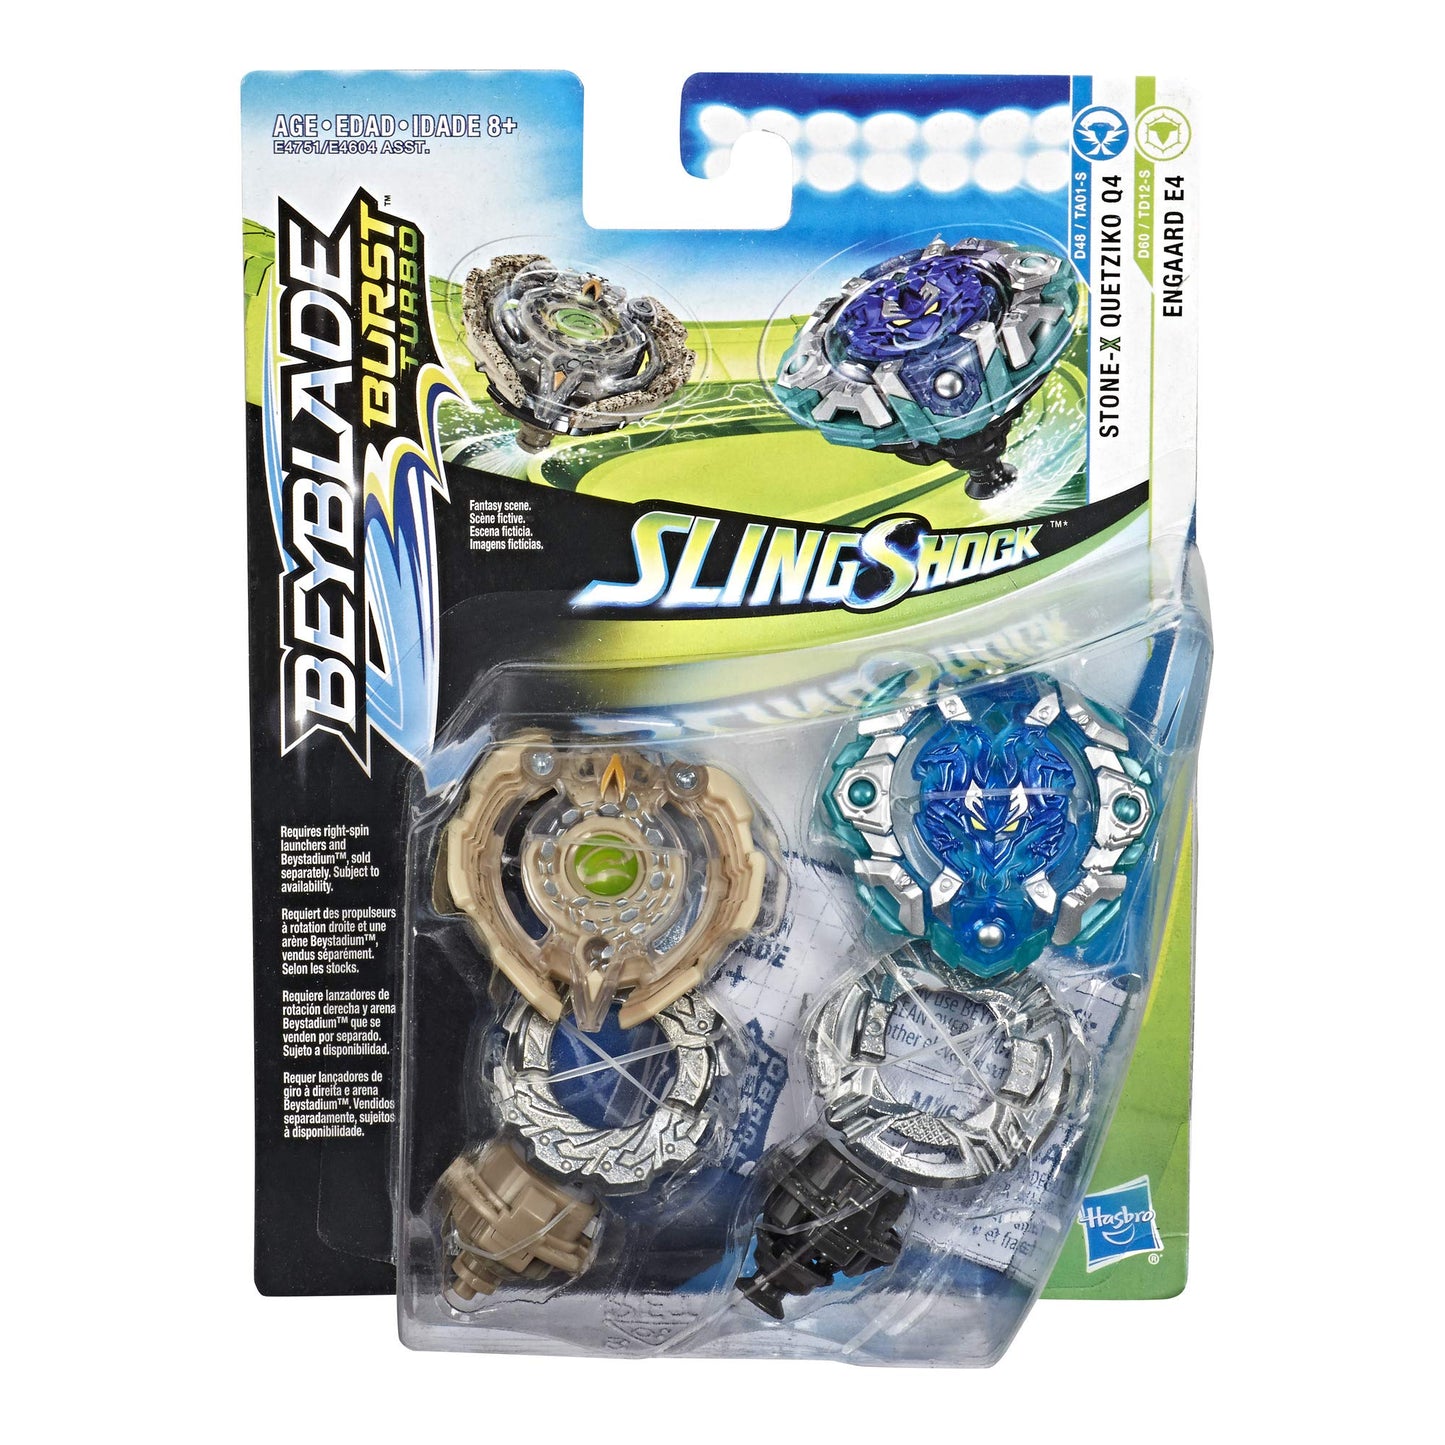 Beyblade Burst Turbo Slingshock Dual Pack Engaard E4 and Stone-X Quetziko Q4 -- 2 Right-Spin Battling Tops, Age 8+